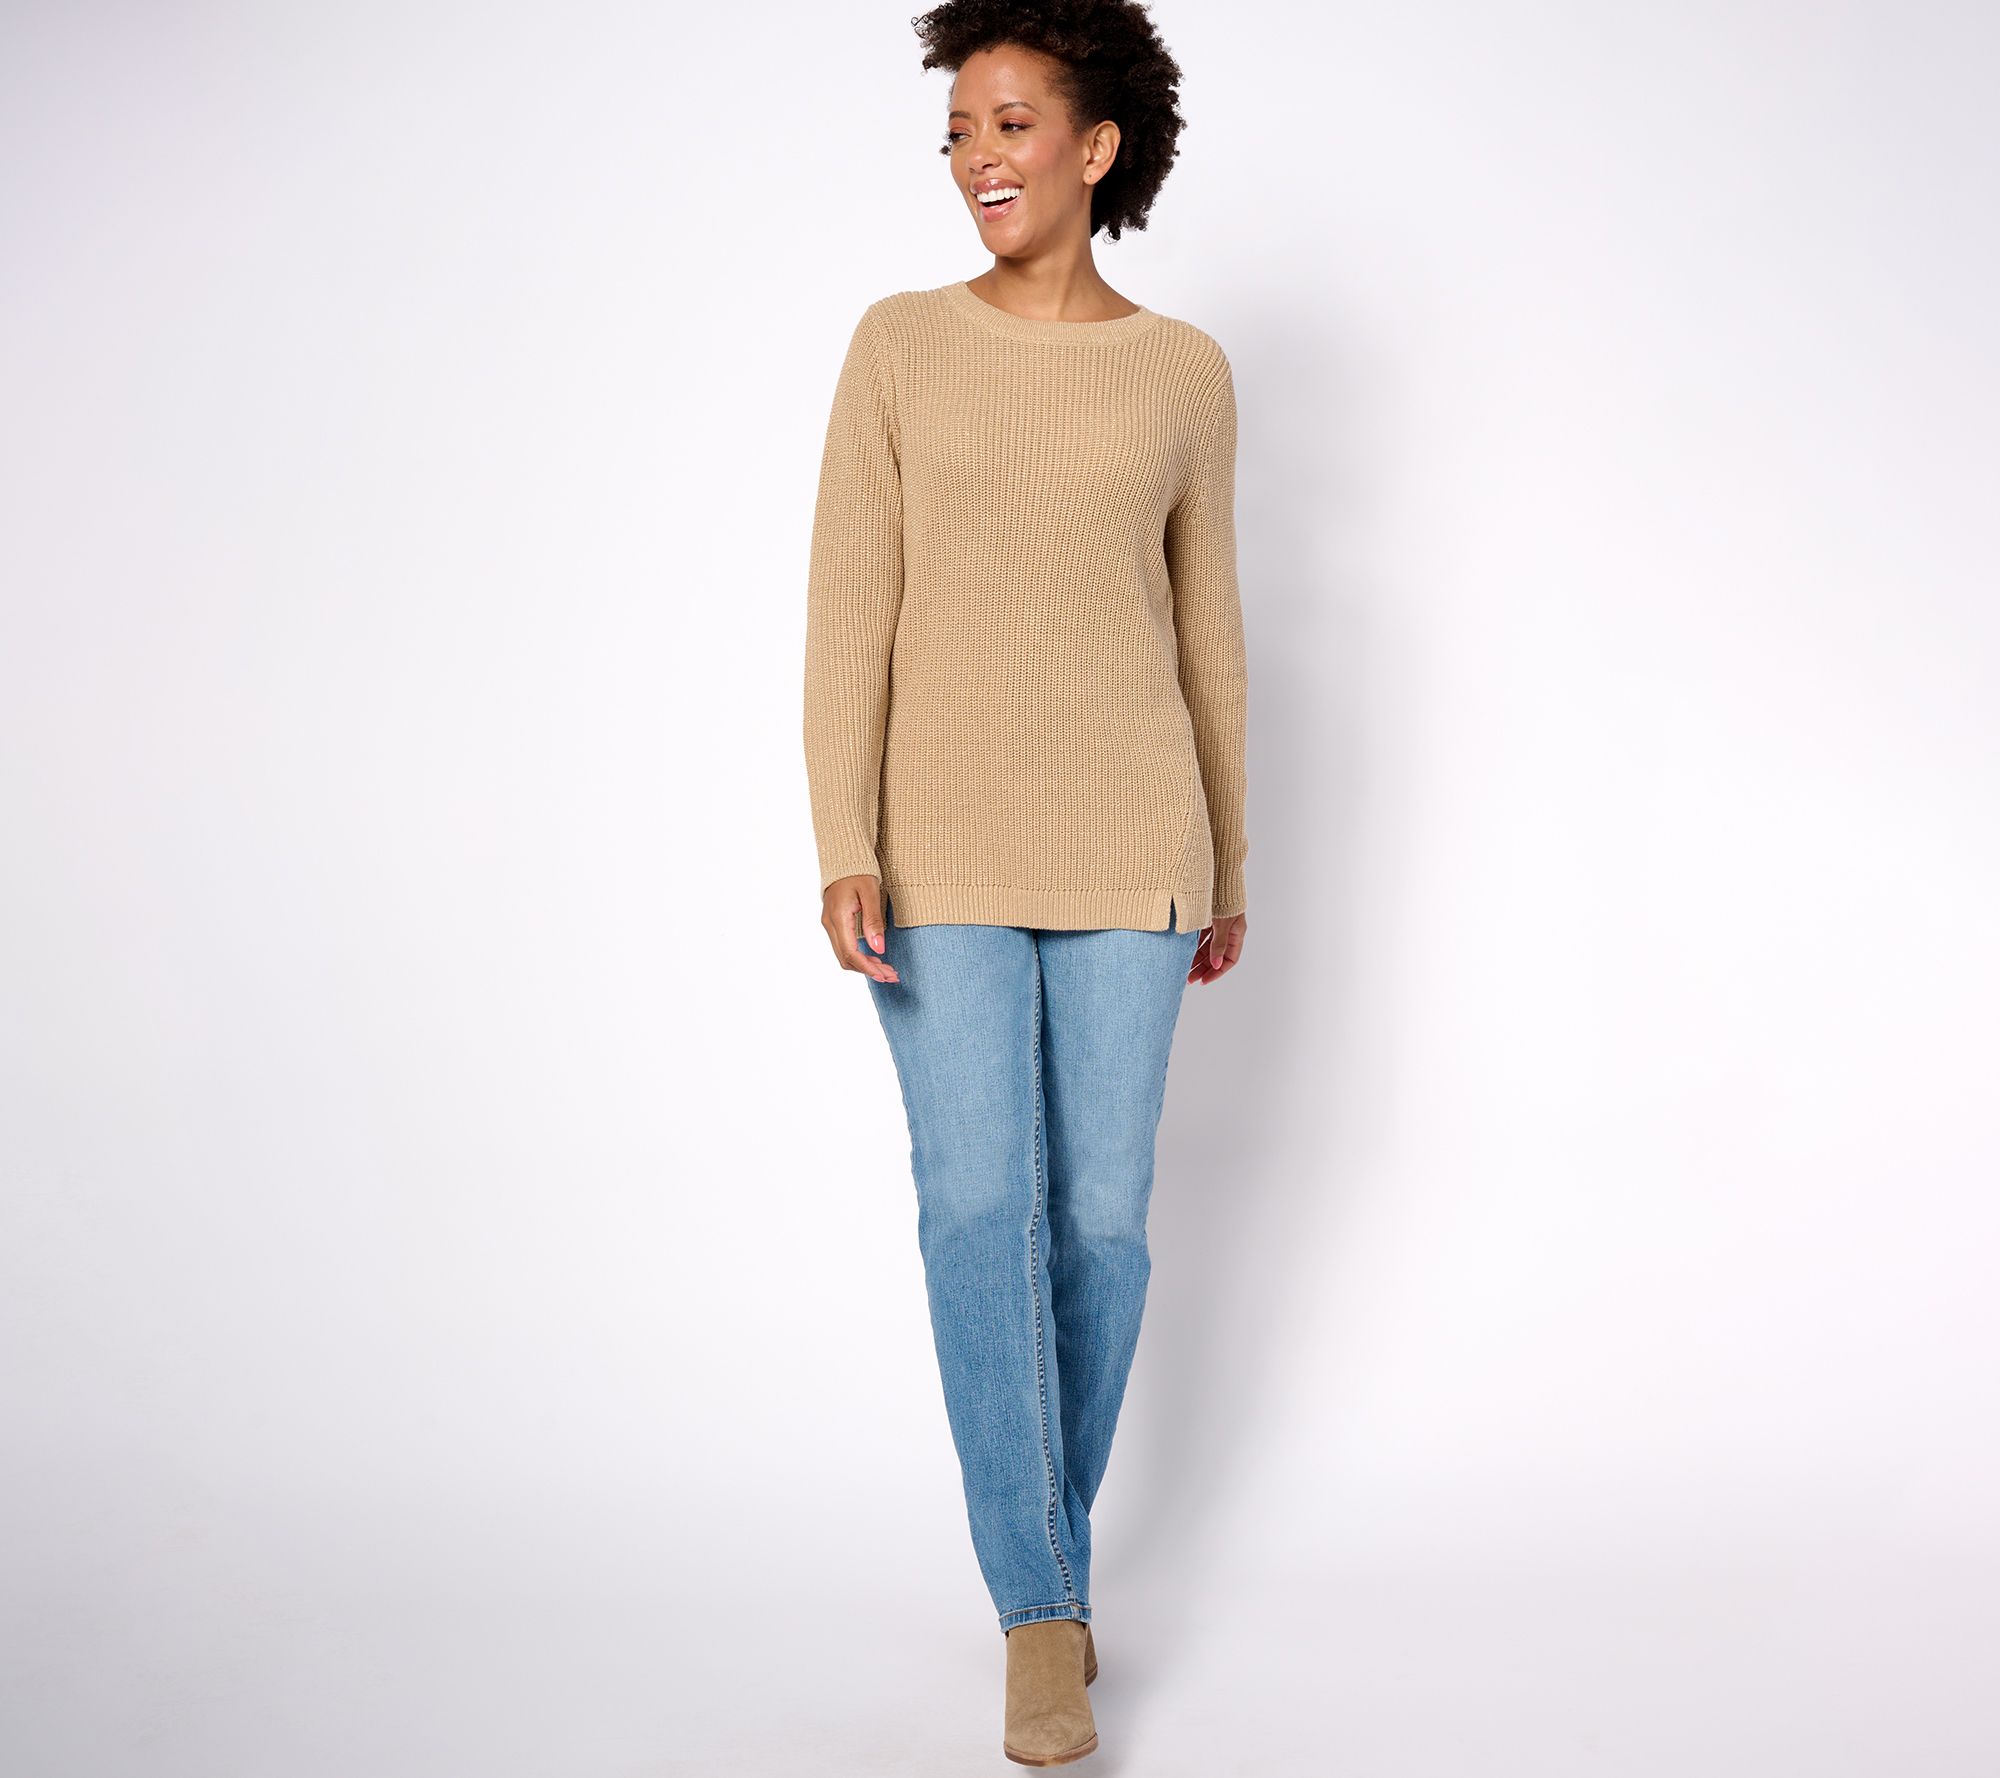 Last Minute Gifts for Her Under $25 - Cashmere & Jeans